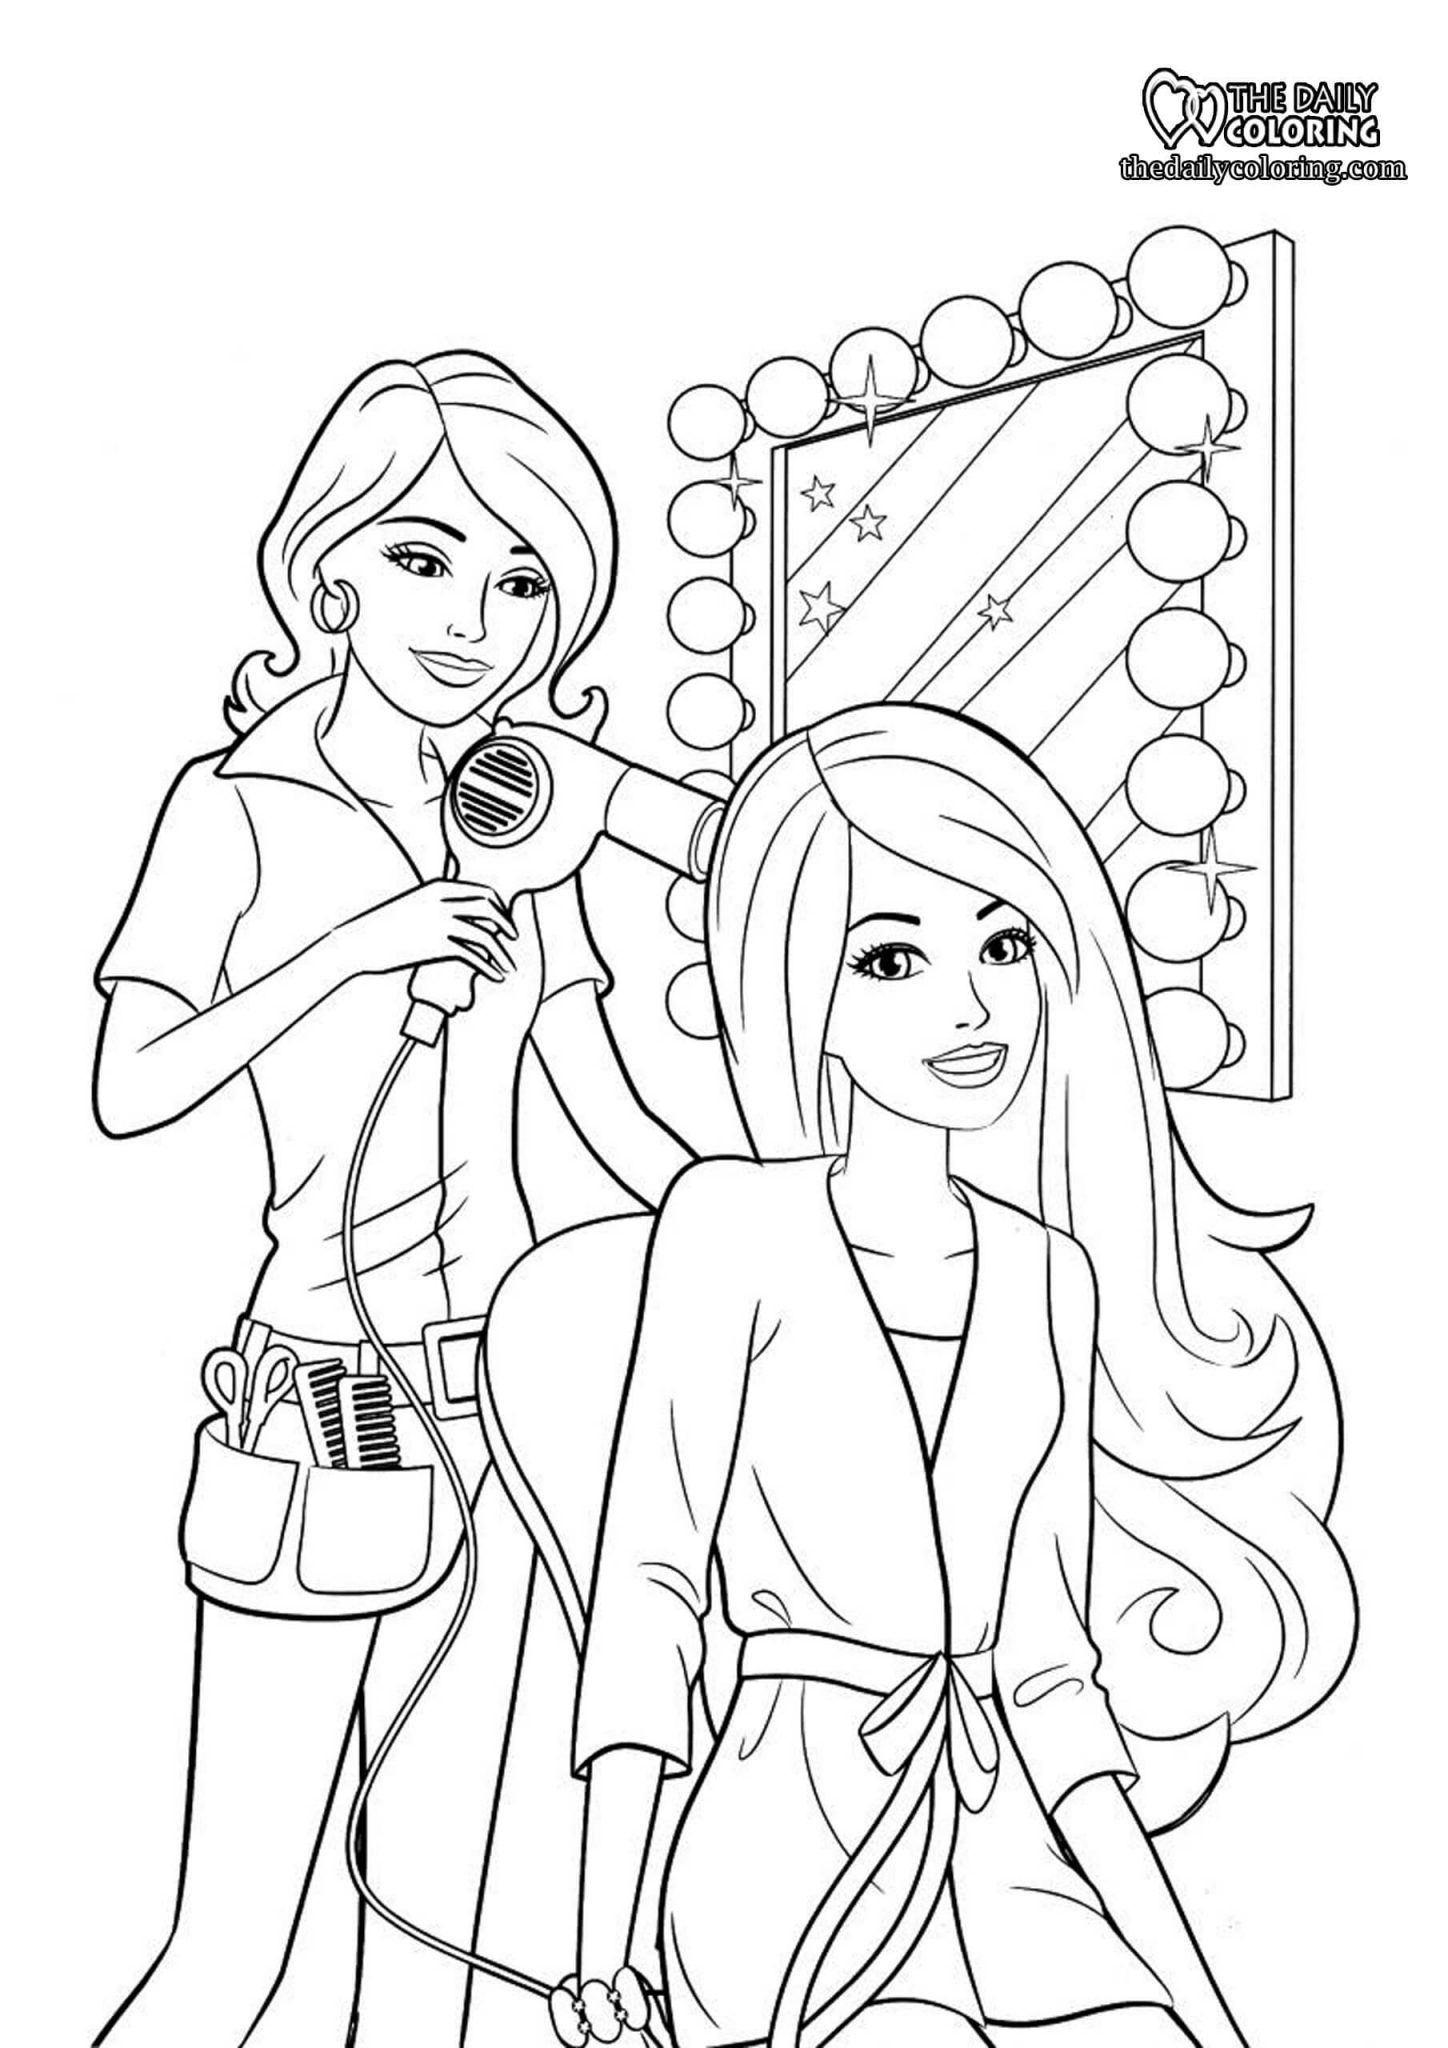 Girl Coloring Pages - The Daily Coloring